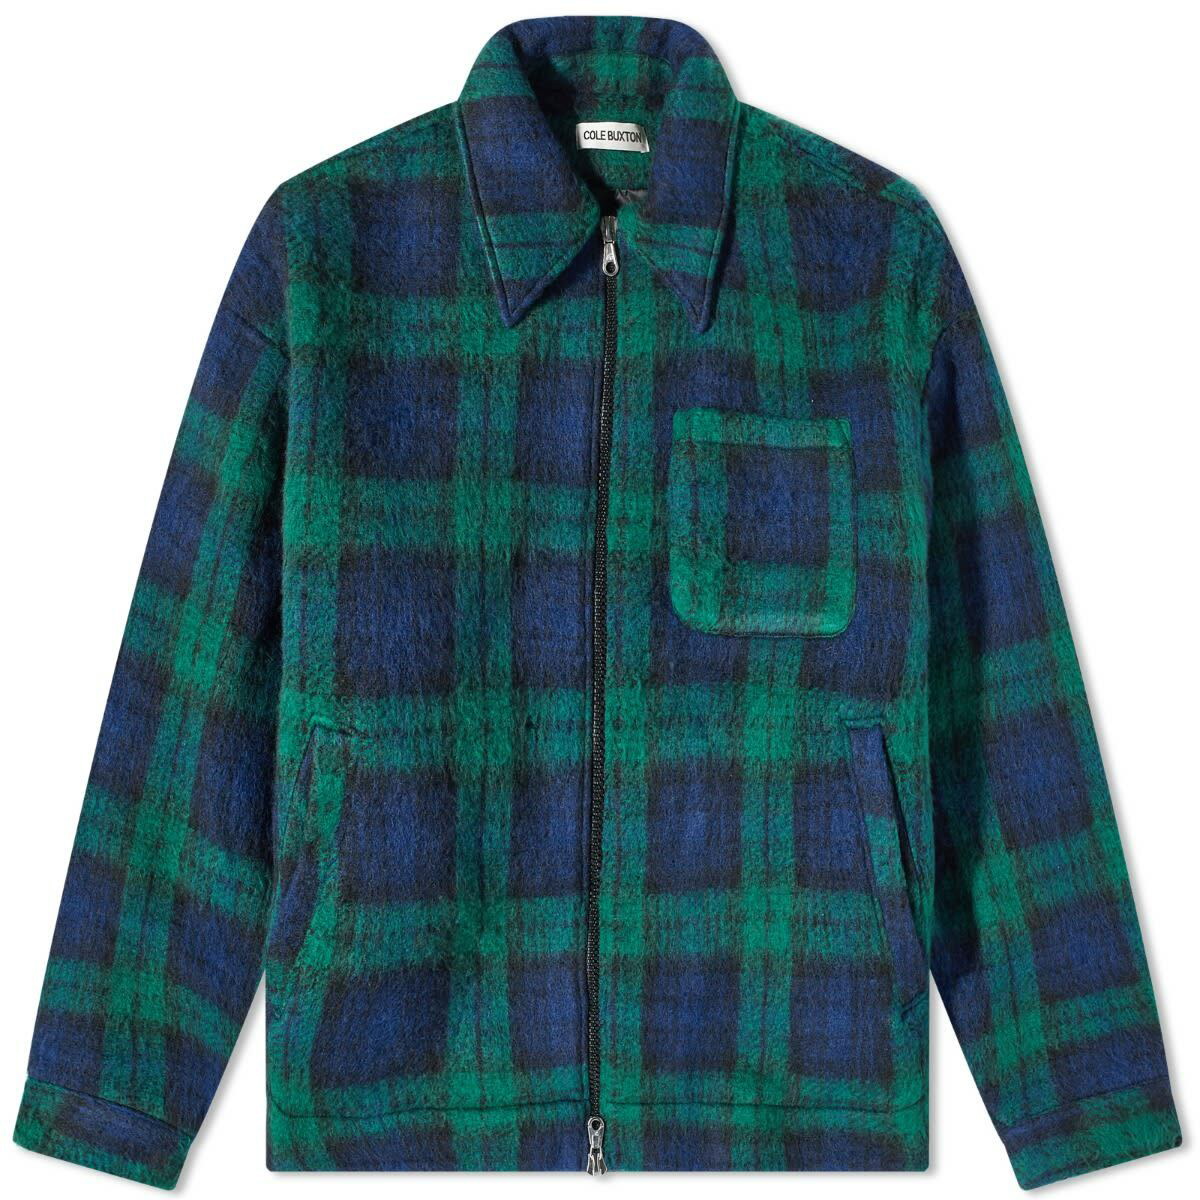 Cole Buxton Men's Flannel Overshirt in Black Watch Cole Buxton